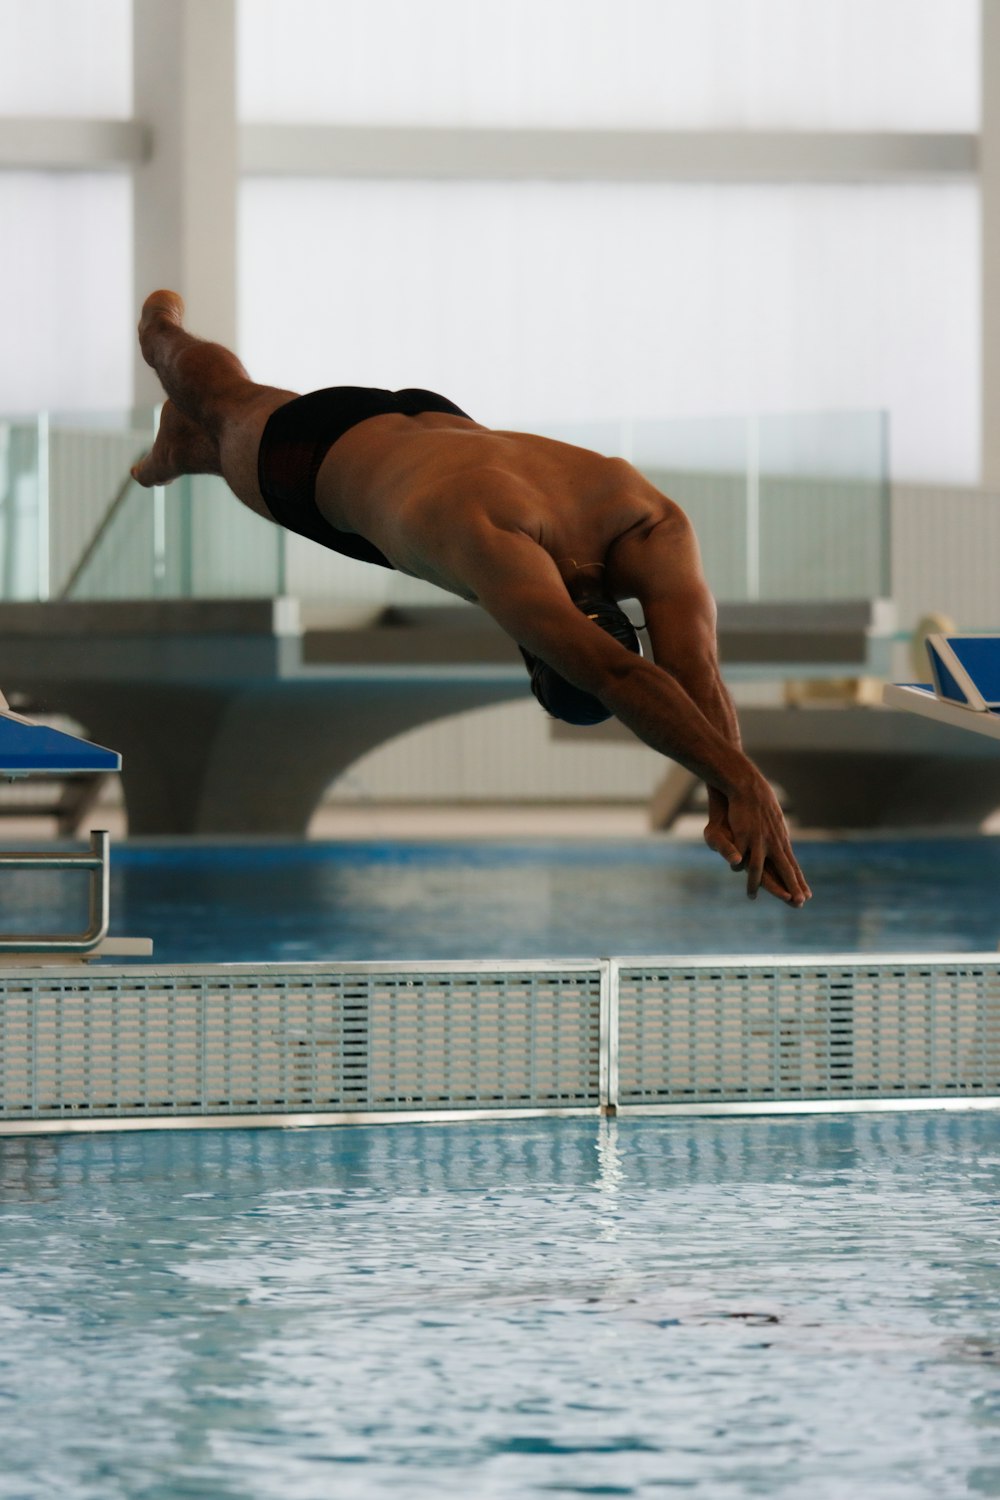 a person jumping into a pool